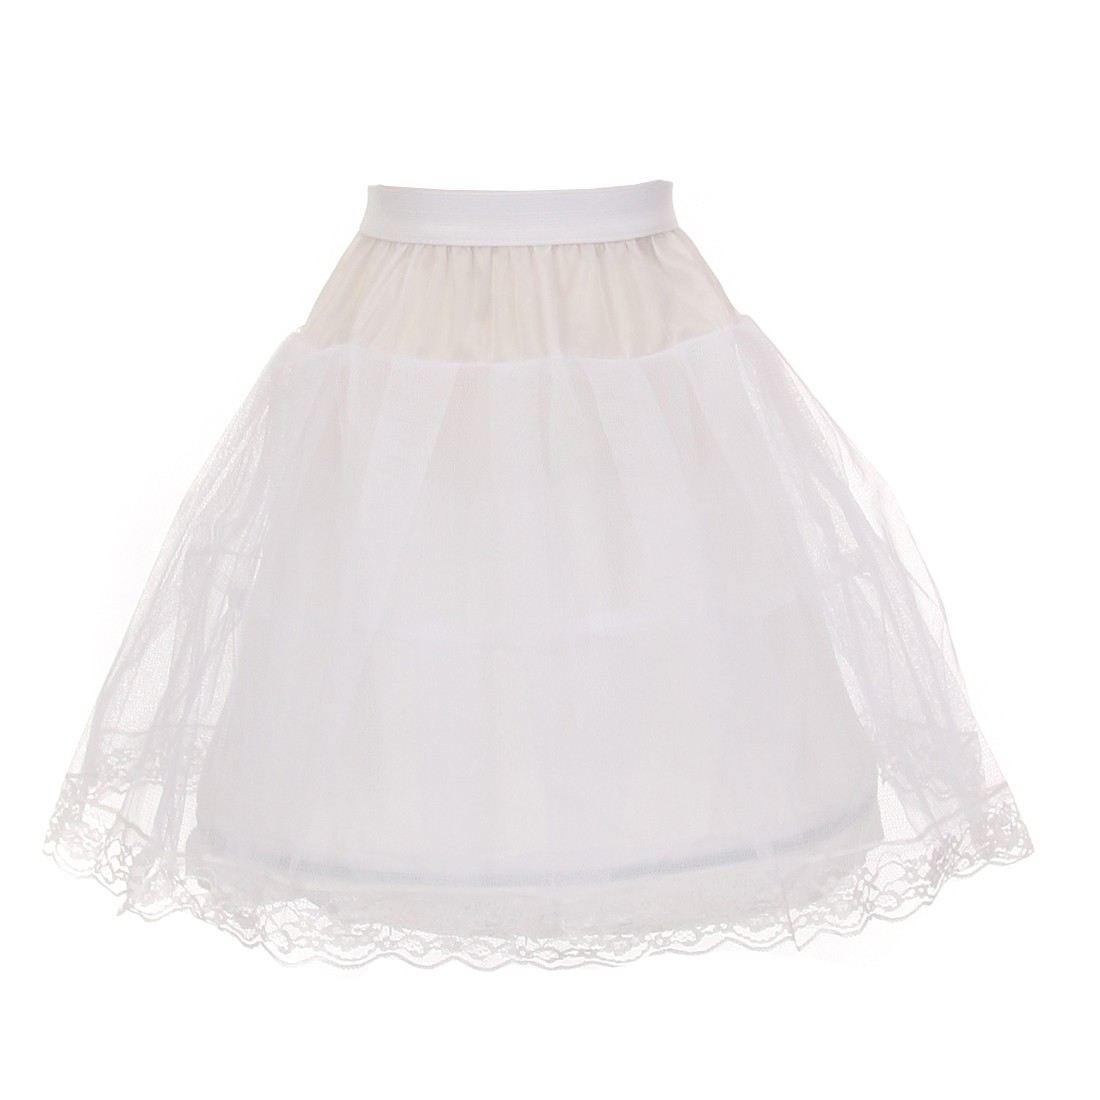 White panty up fly-away petticoat